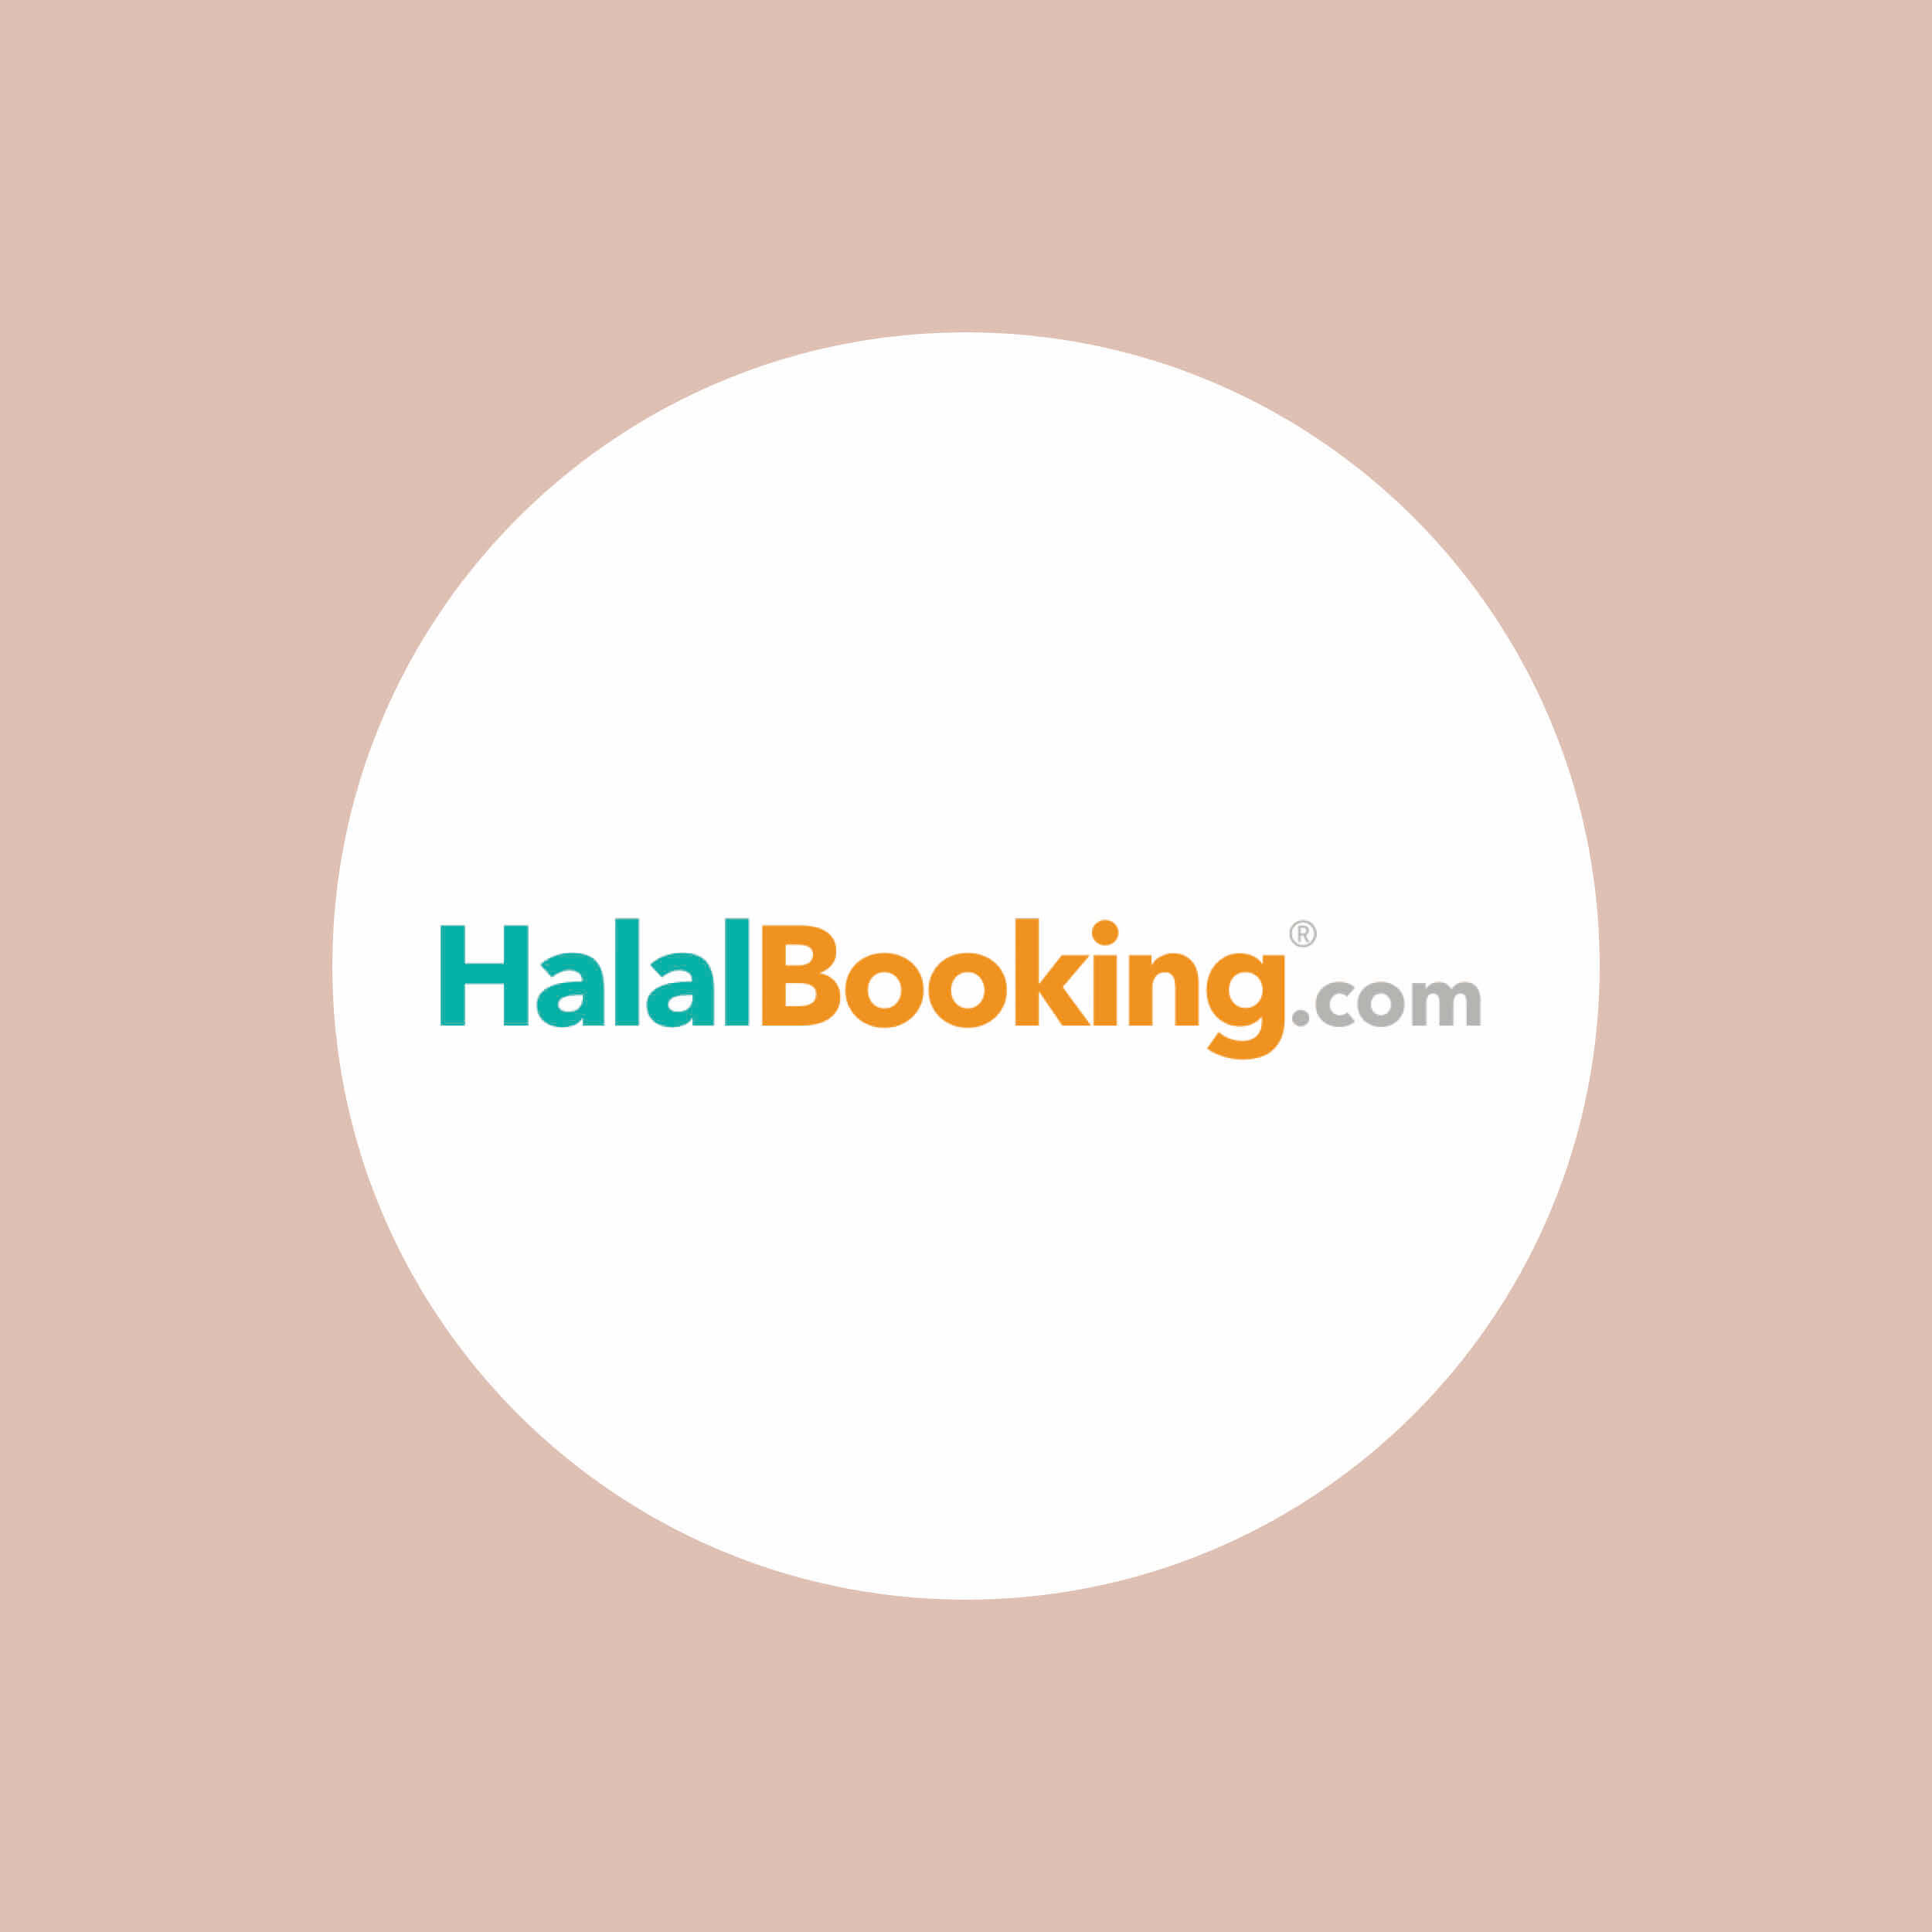 HalalBooking – A targeted collaboration